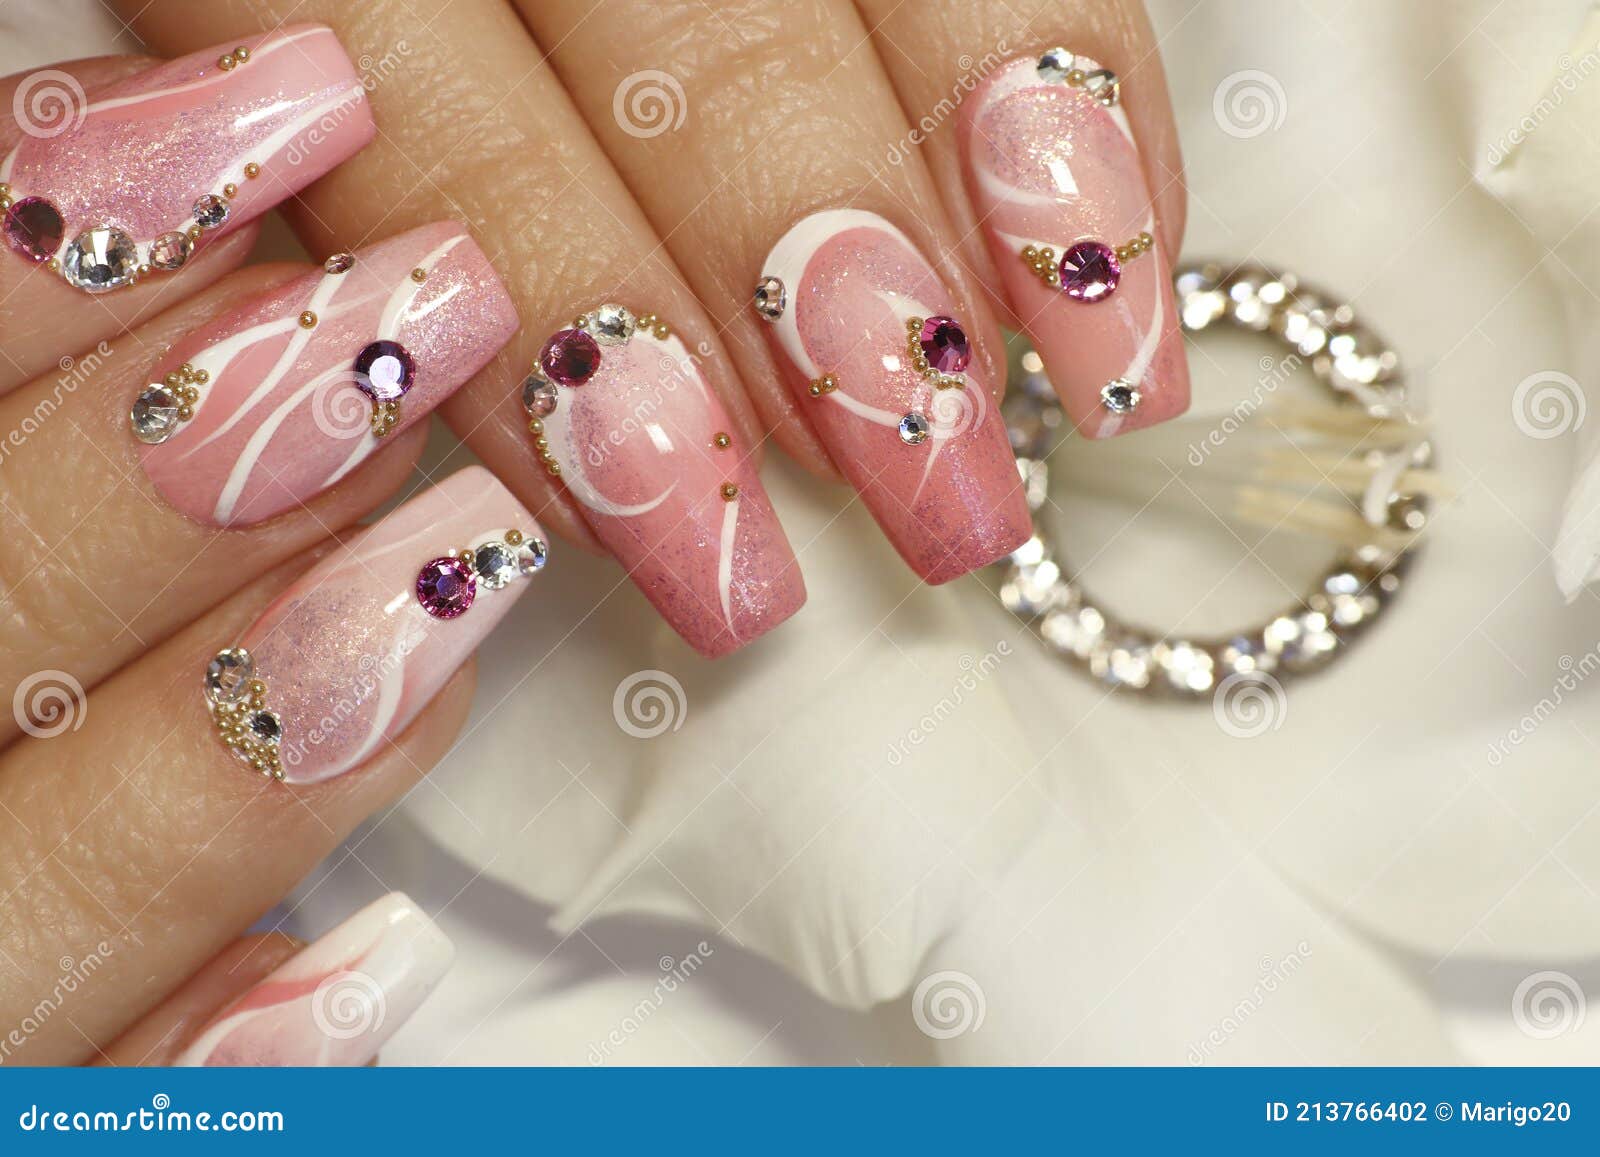 Light Pink Nail Design with White Lines, Rhinestones, Glitter. Stock Photo  - Image of manicure, design: 213766402